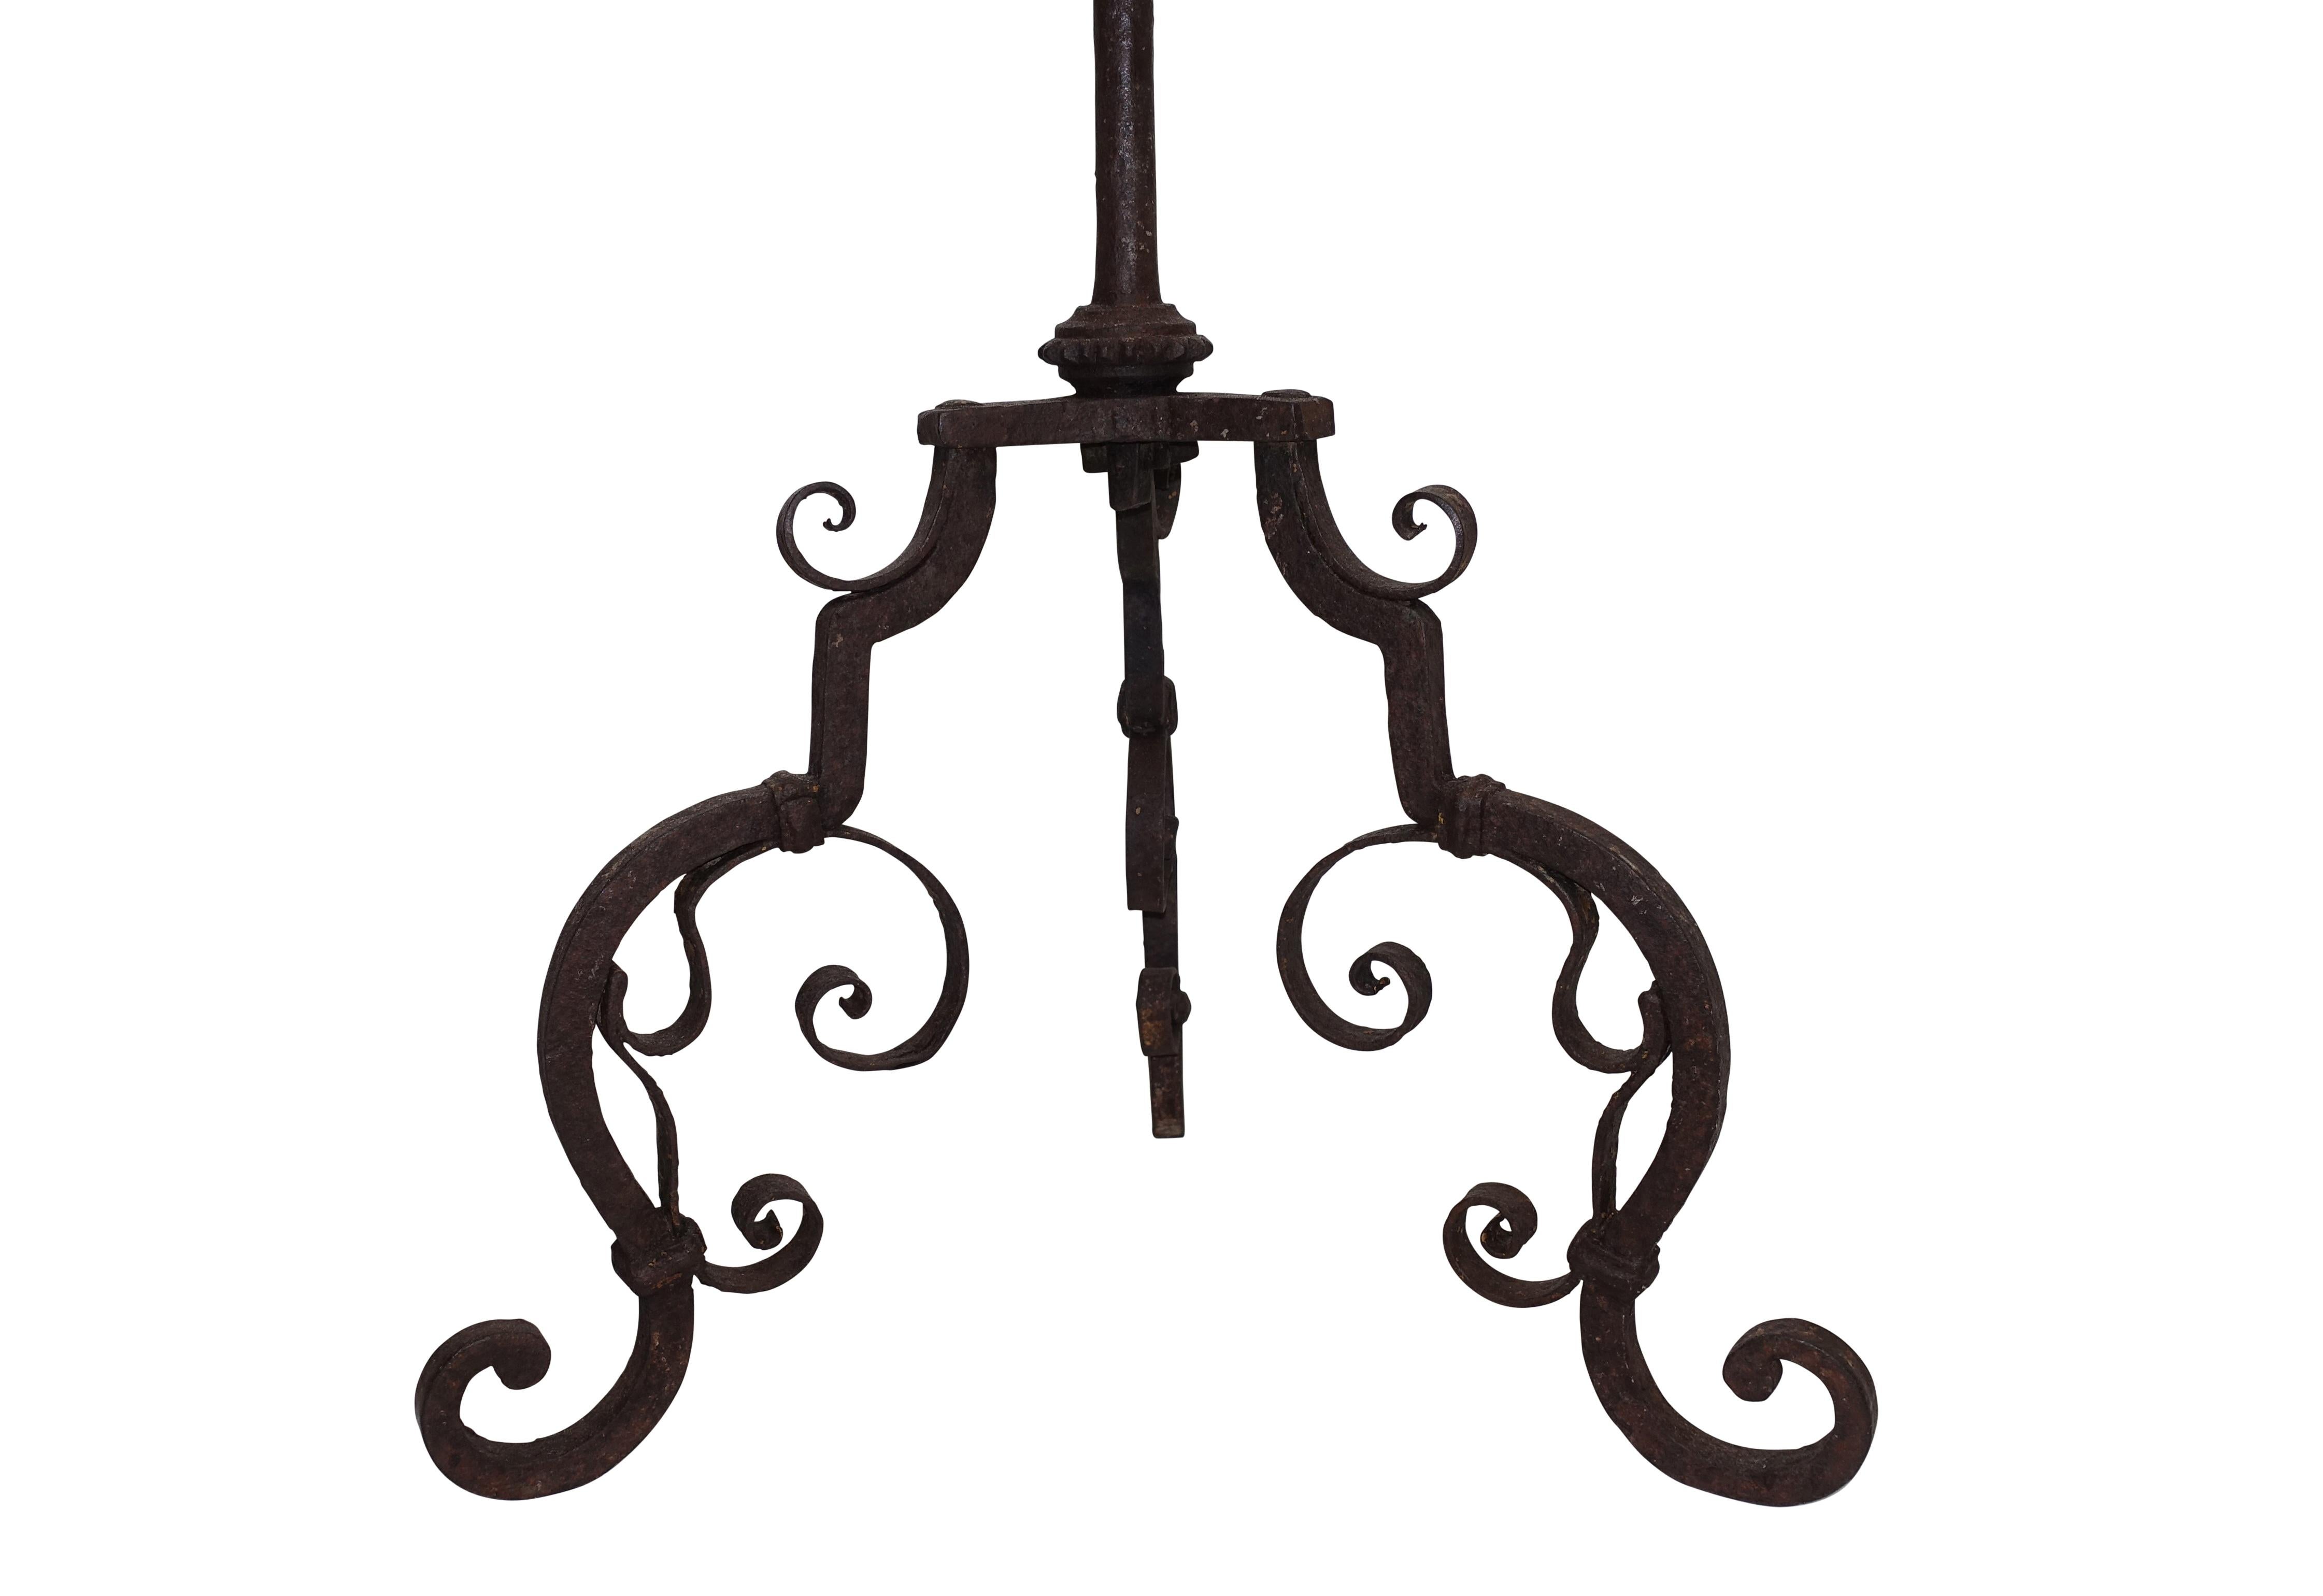 A hand-wrought iron candle stand with brass center detail, European 18th century.